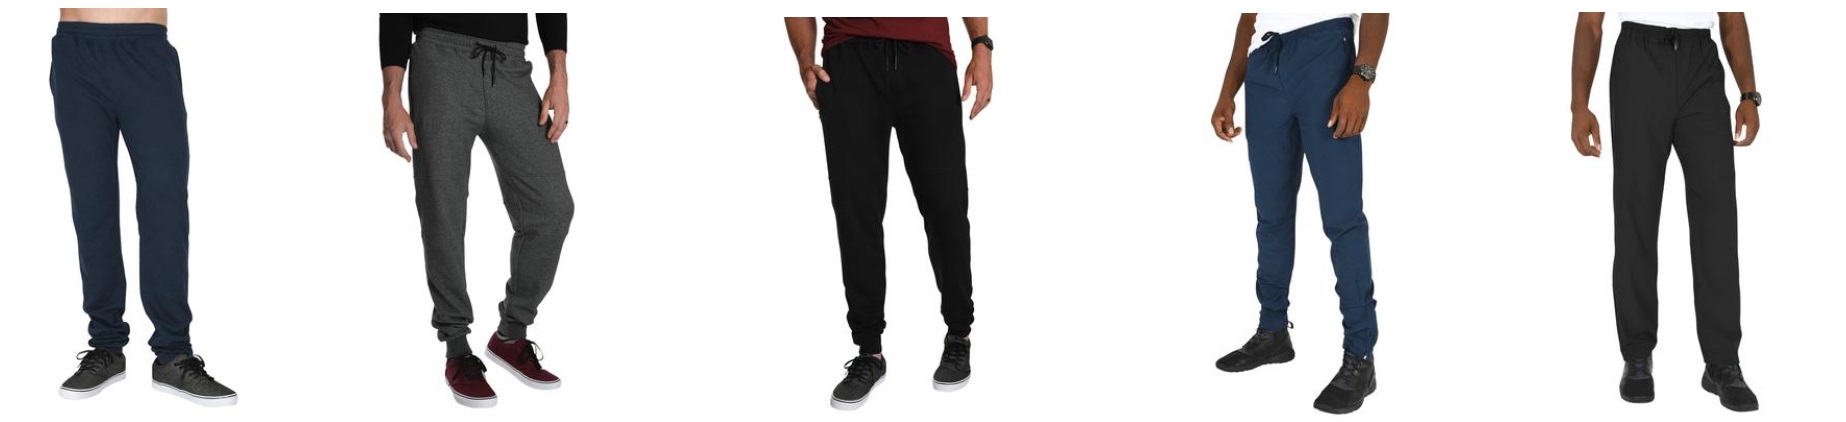 Tall Slim Joggers, Training and Sweatpants for Tall Skinny Guys